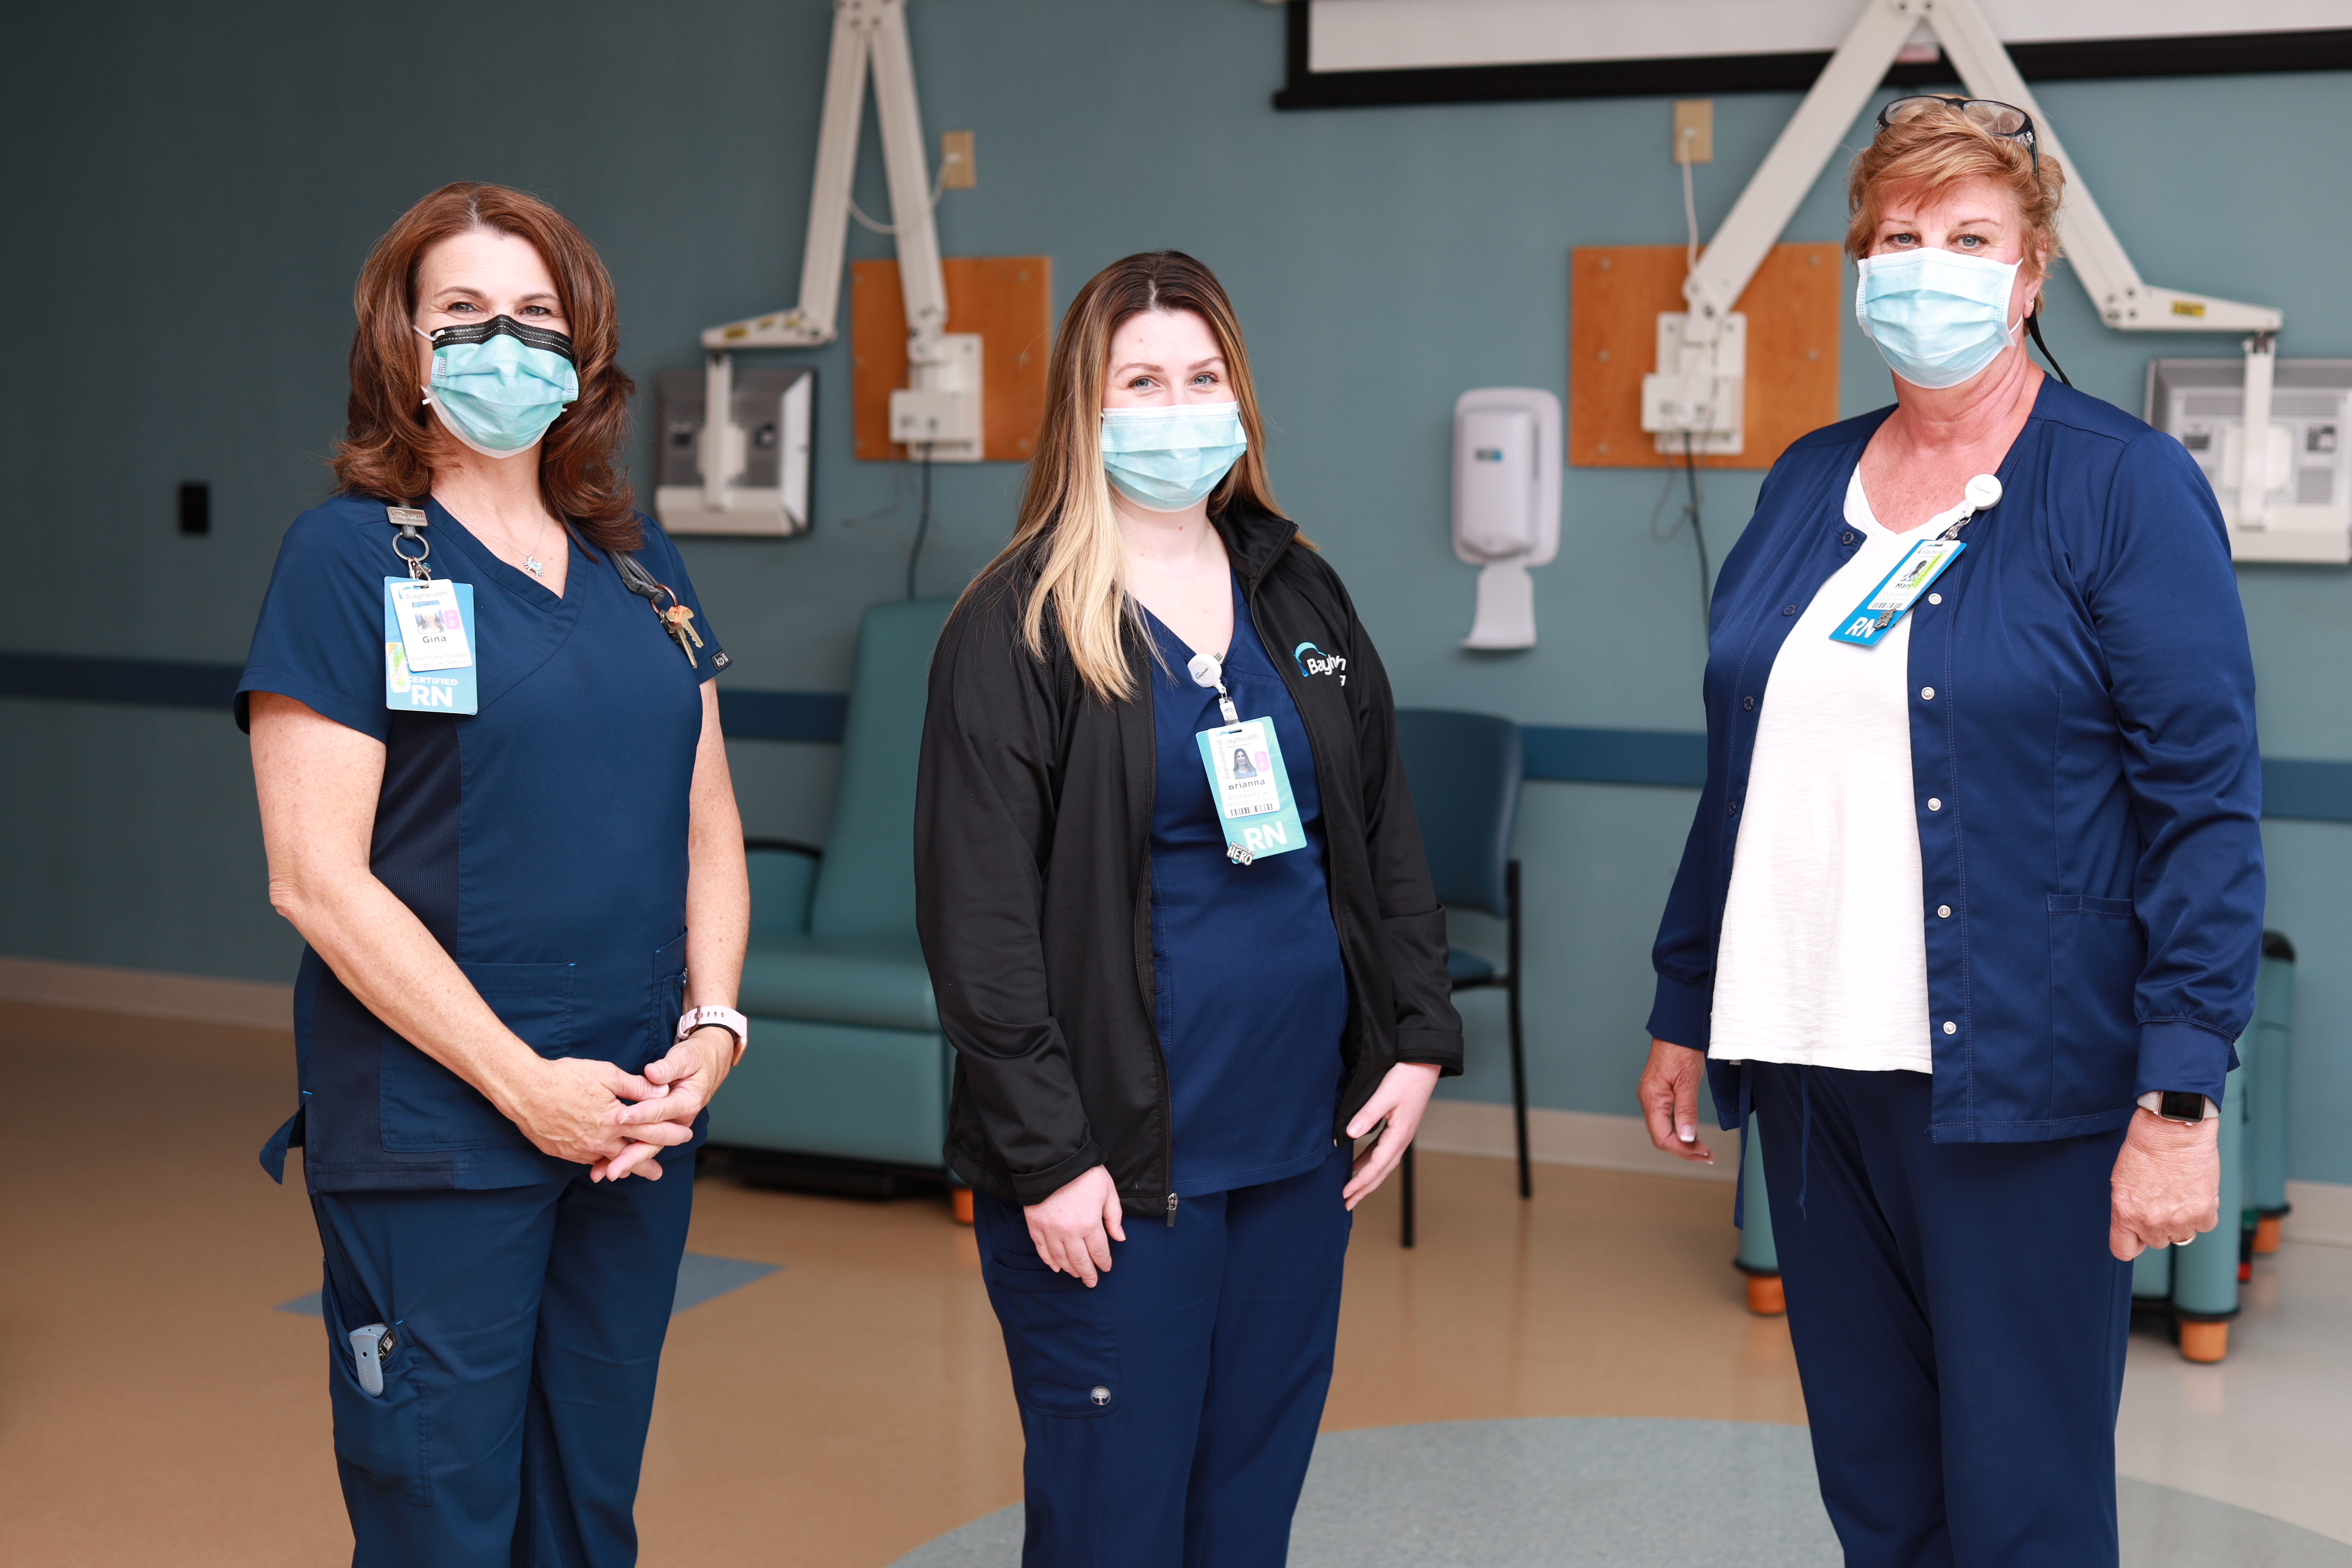 Mary Carter, Gina Collins and Brianna Trice worked tirelessly during the course of the 2020 COVID-19 pandemic.